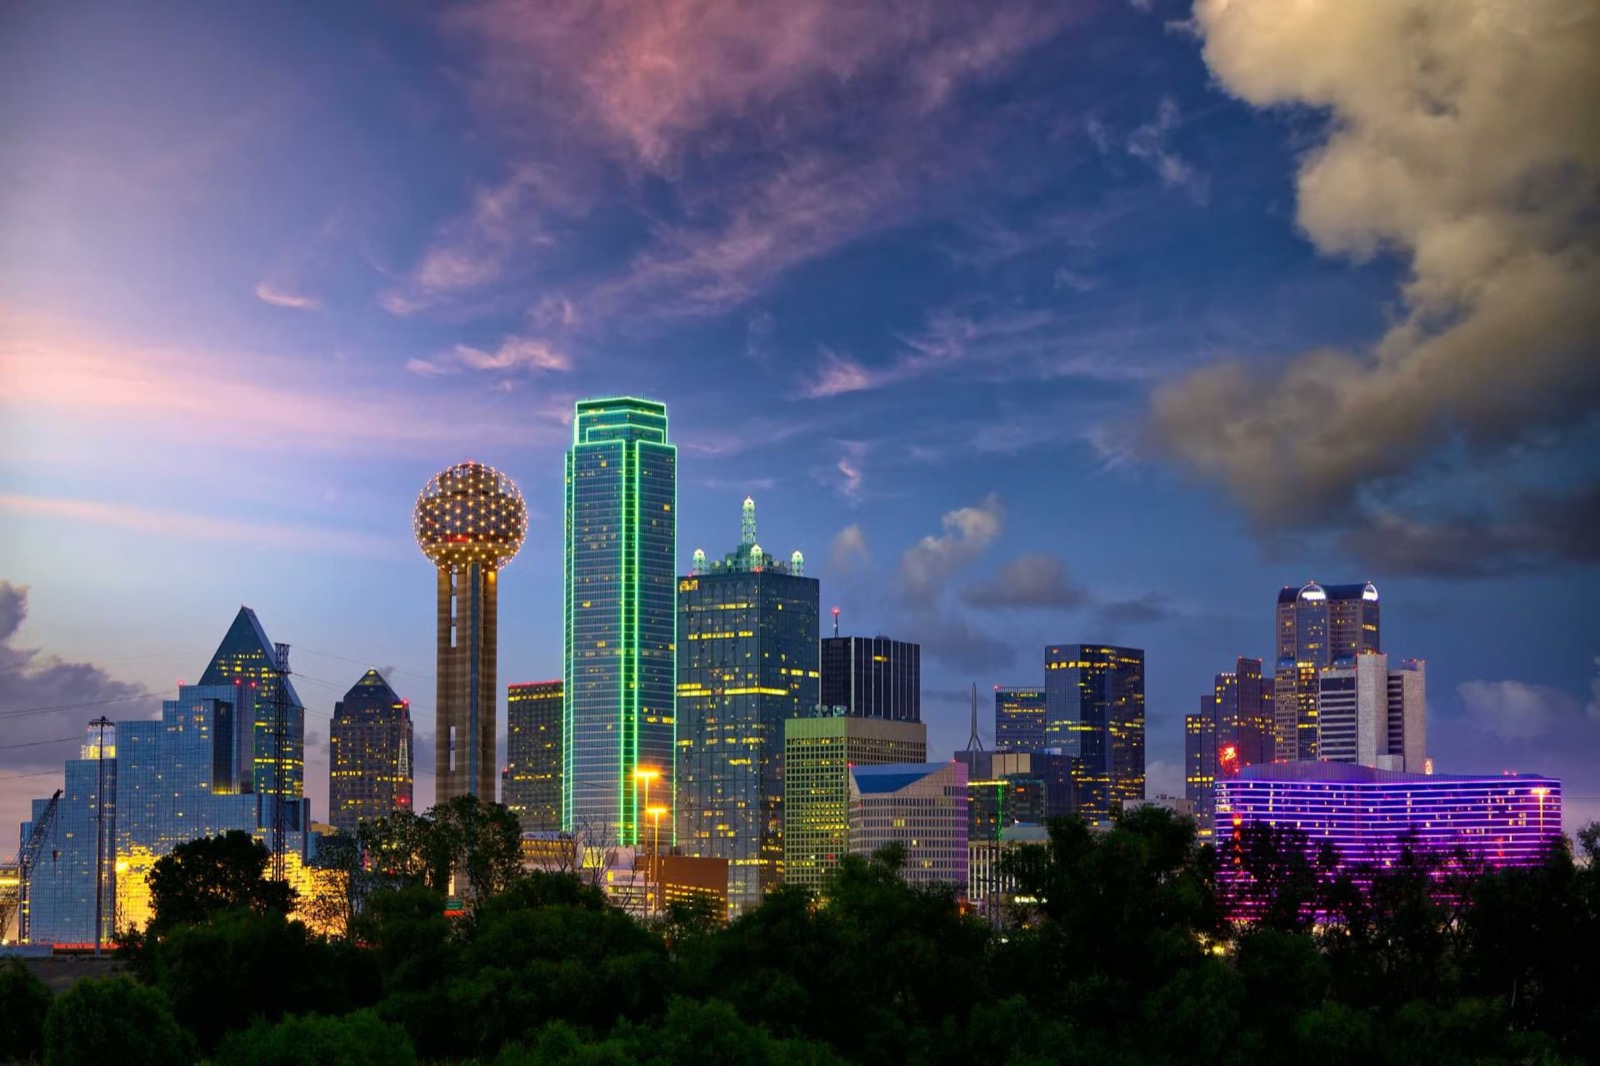 Name That City! Put Your Travel Knowledge to Test With This Picture Quiz! Dallas, Texas Skyline